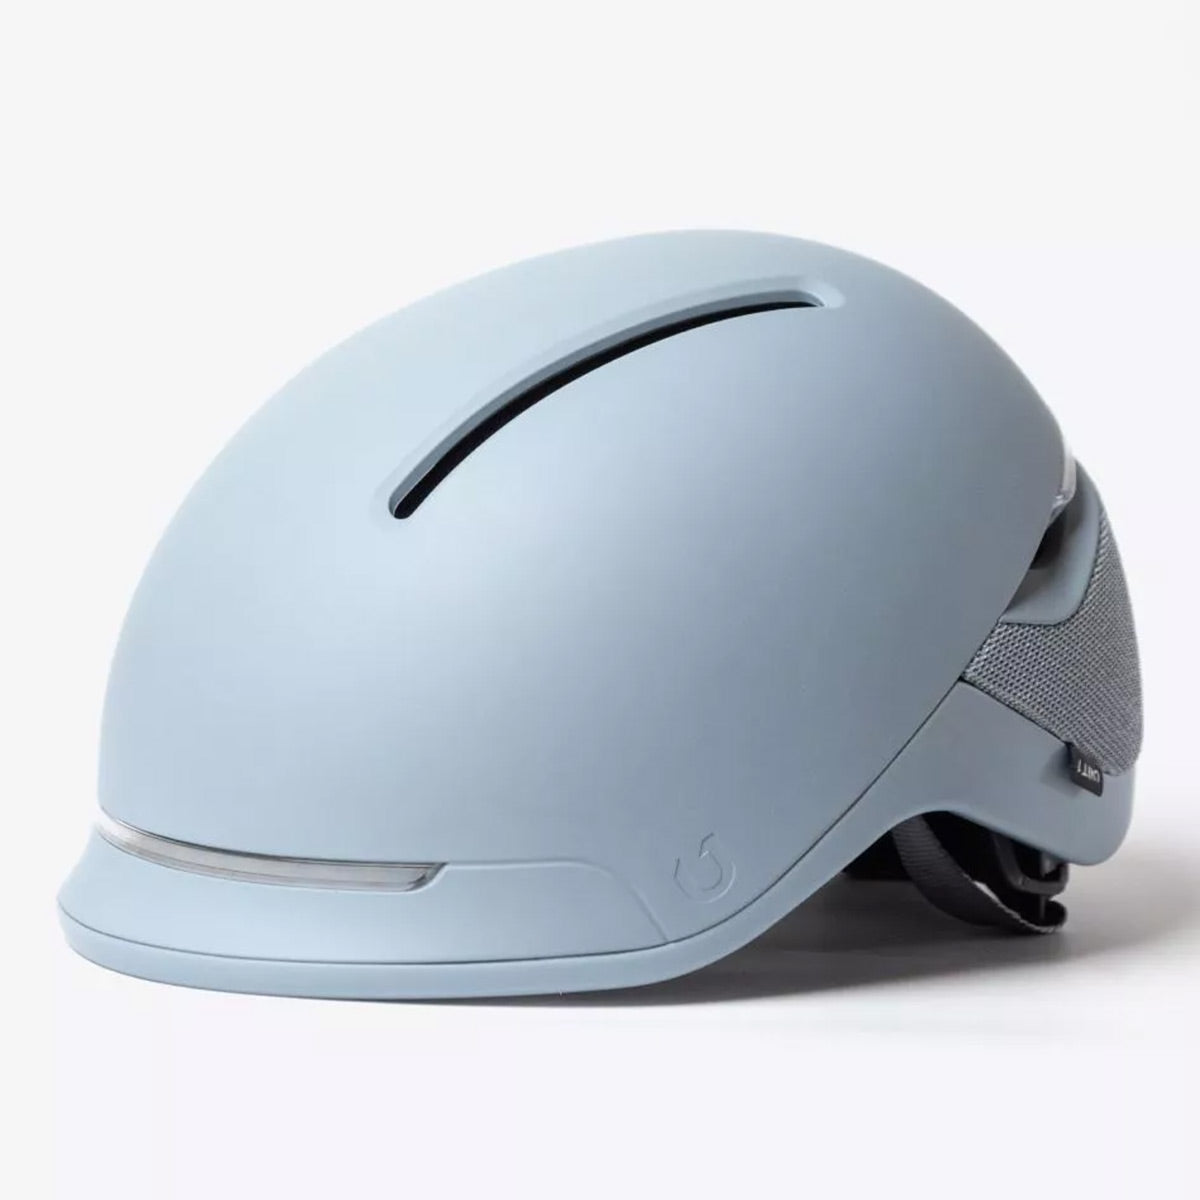 Unit 1 Large FARO Smart Helmet with IPX-6 Rating and Mips Impact Safety System (Stingray)